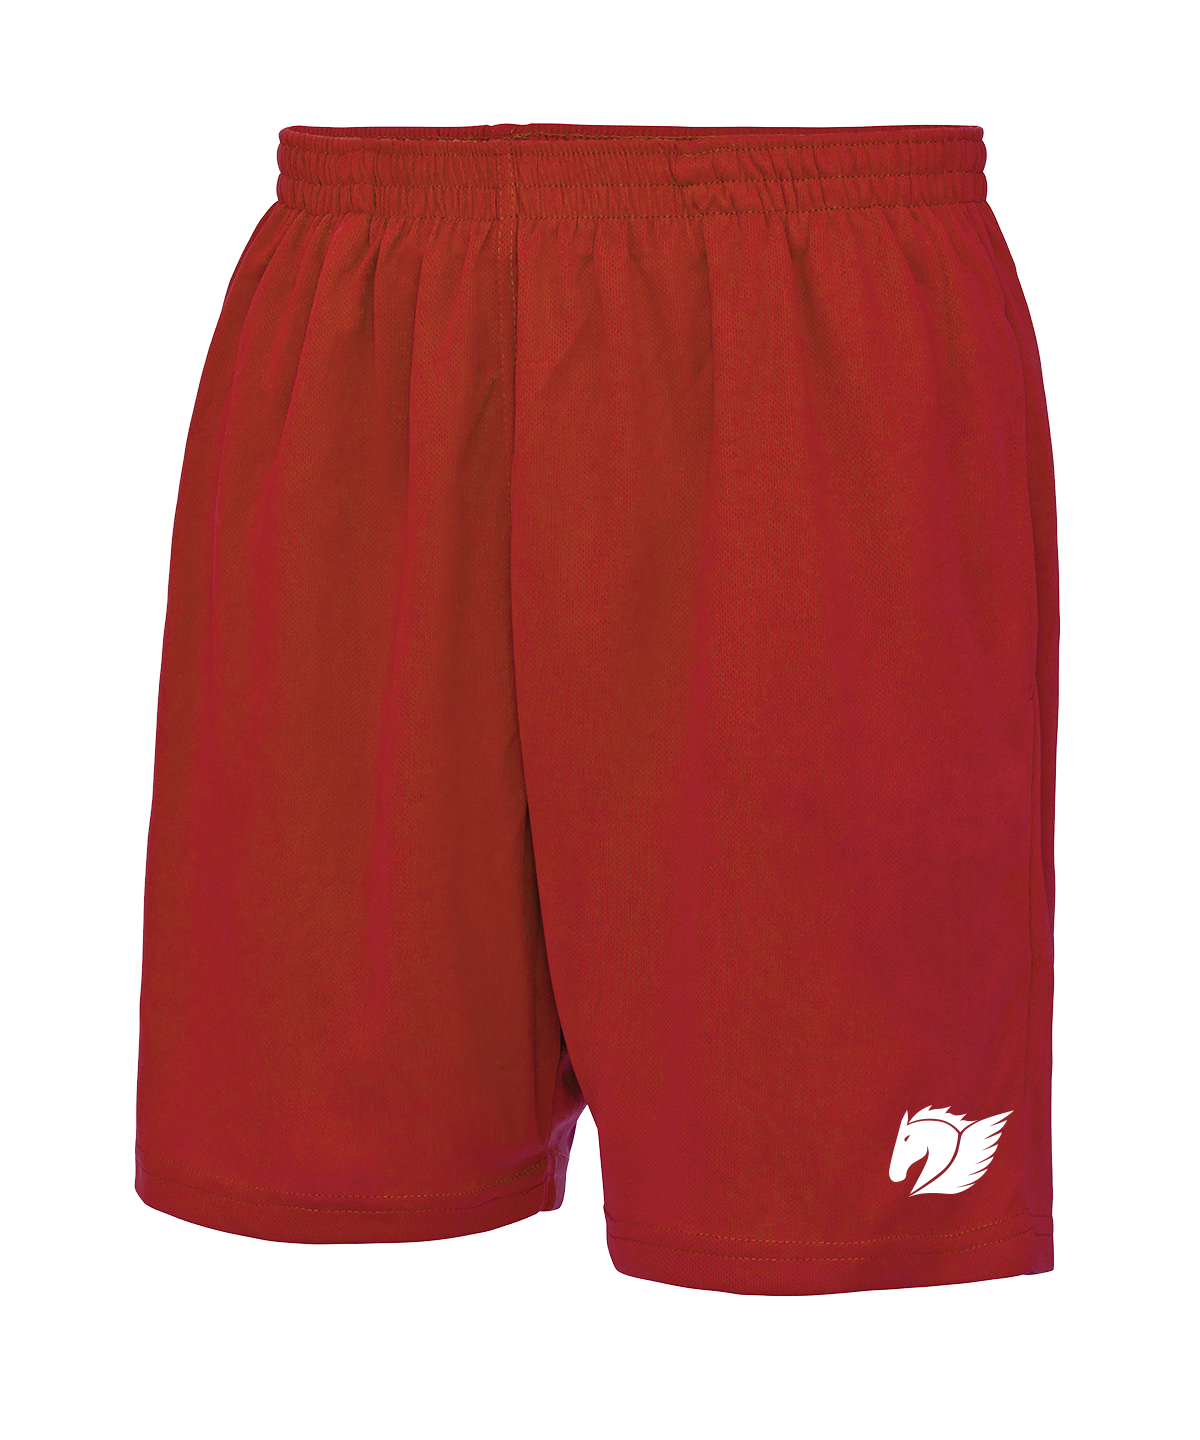 Essential Shorts - Red